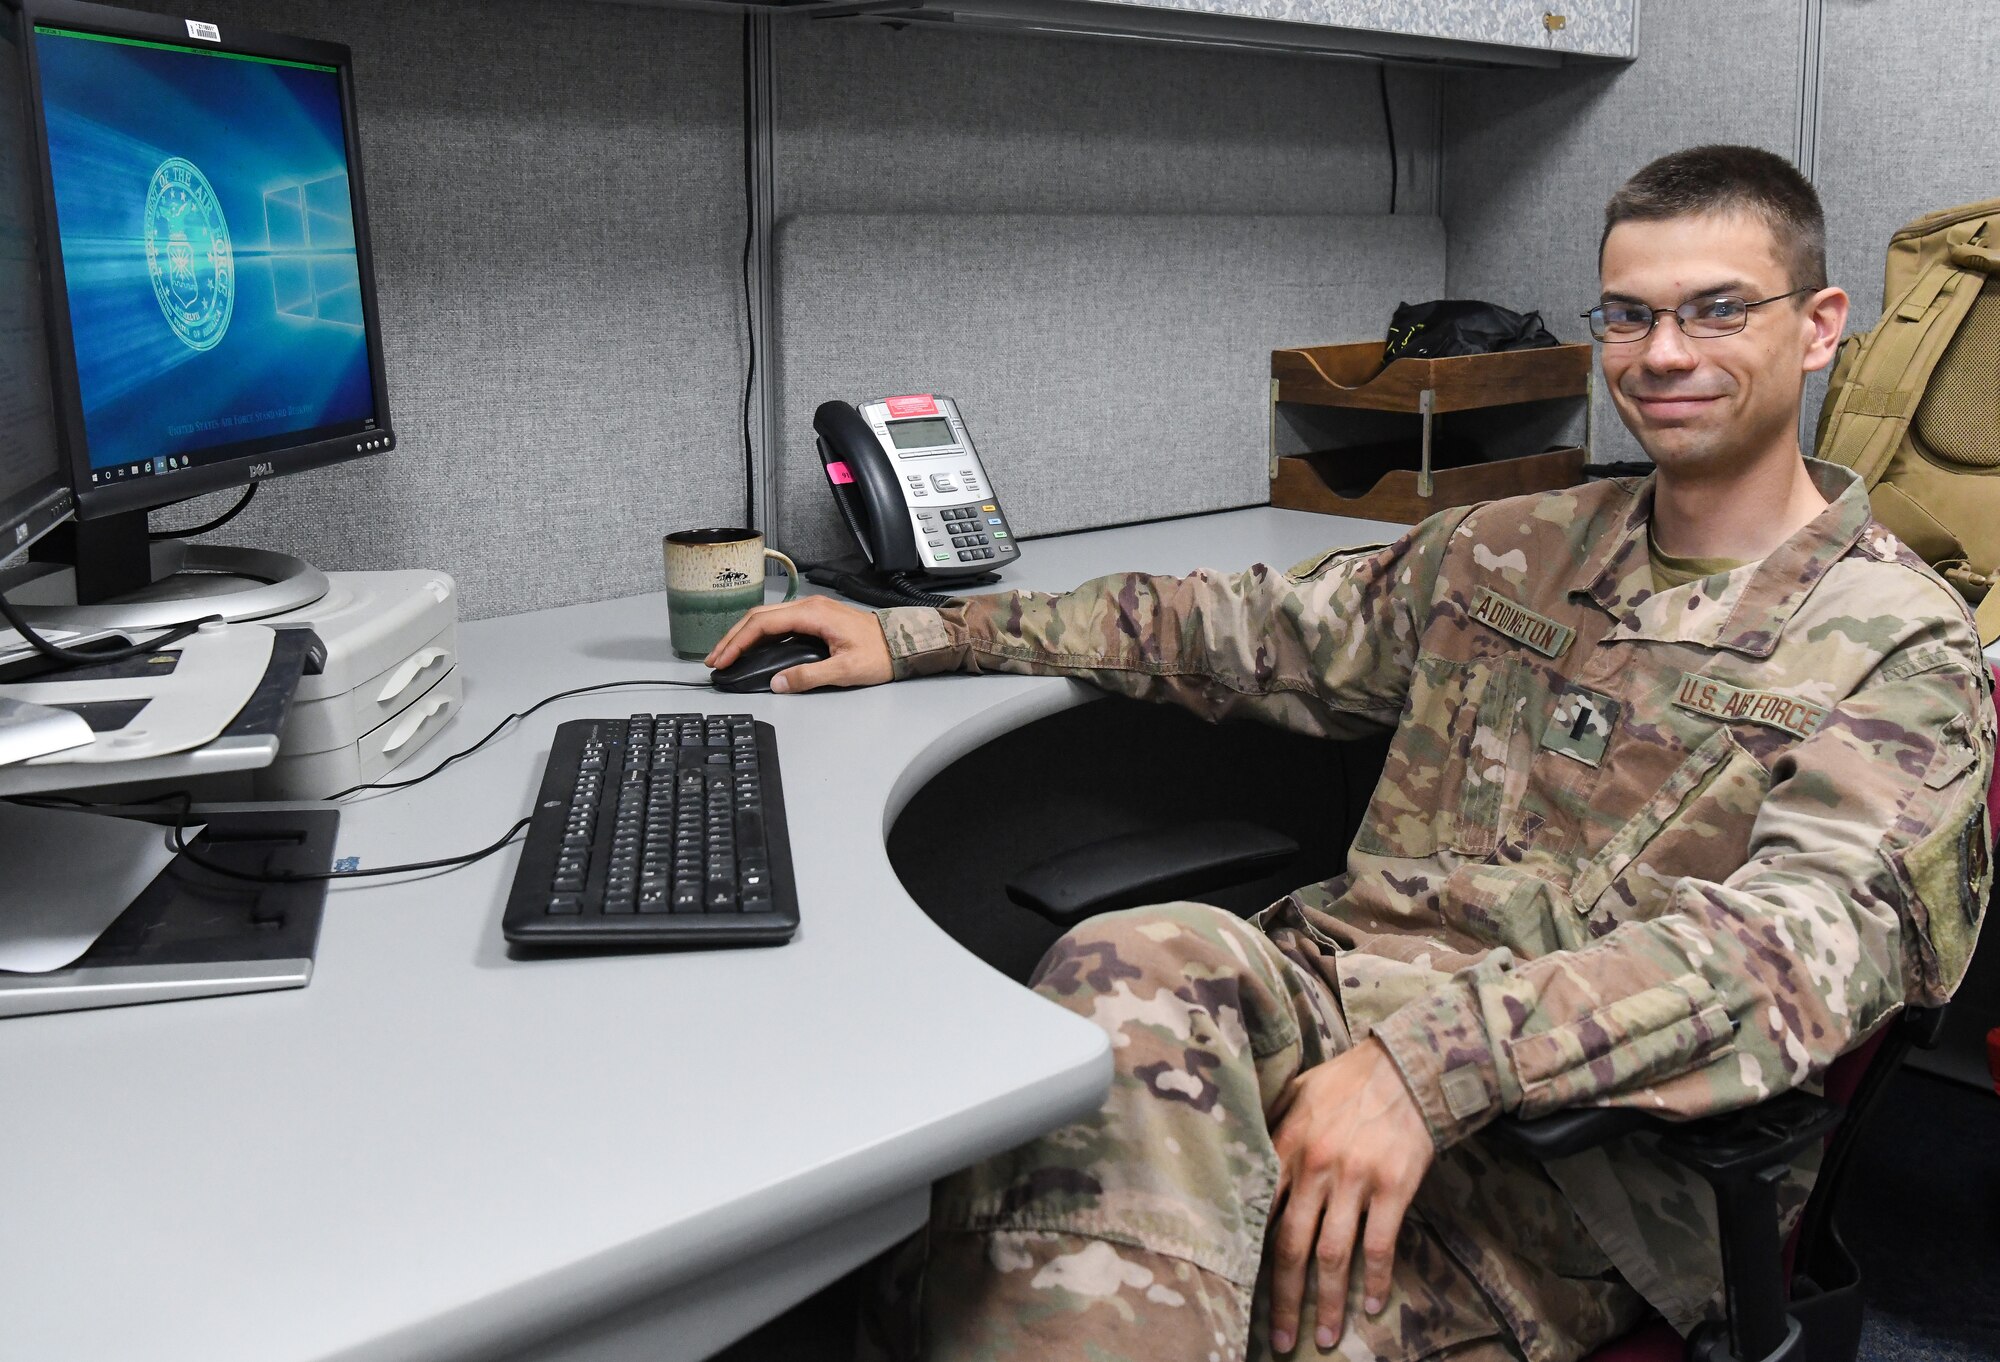 1st Lt. Nicolas Addington works in the Arnold Engineering Development Complex Financial Management Office at Arnold Air Force Base, Tenn., July 15, 2020. He recently returned from a deployment. (U.S. Air Force photo by Jill Pickett)